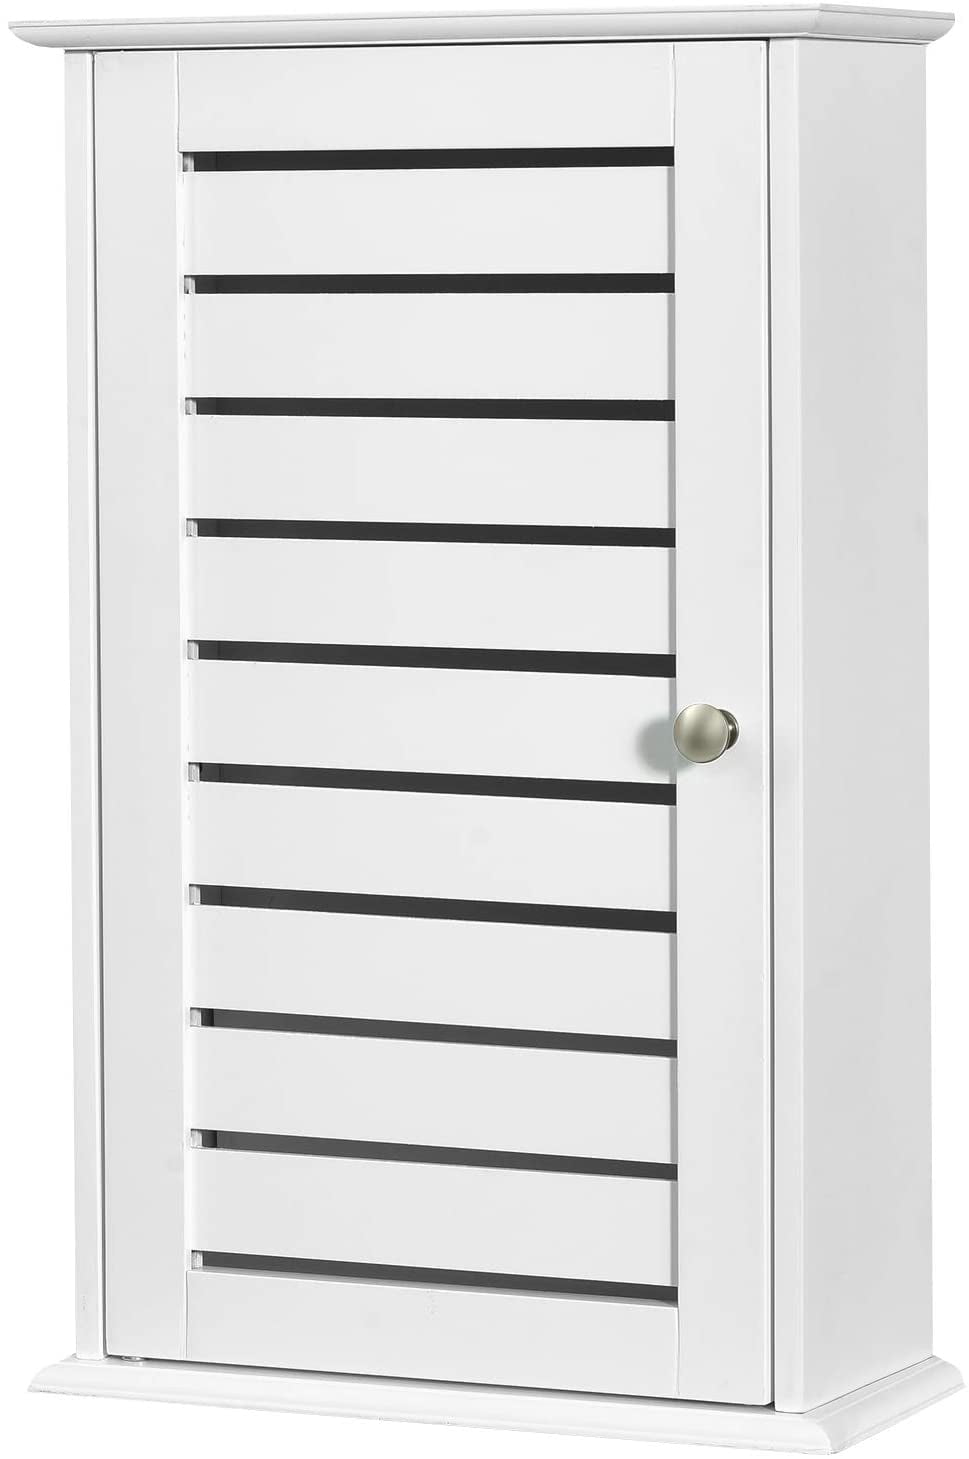 Glosen Locking Medicine Cabinet Wall Mounted and Portable Storage Container  Big 696578795631